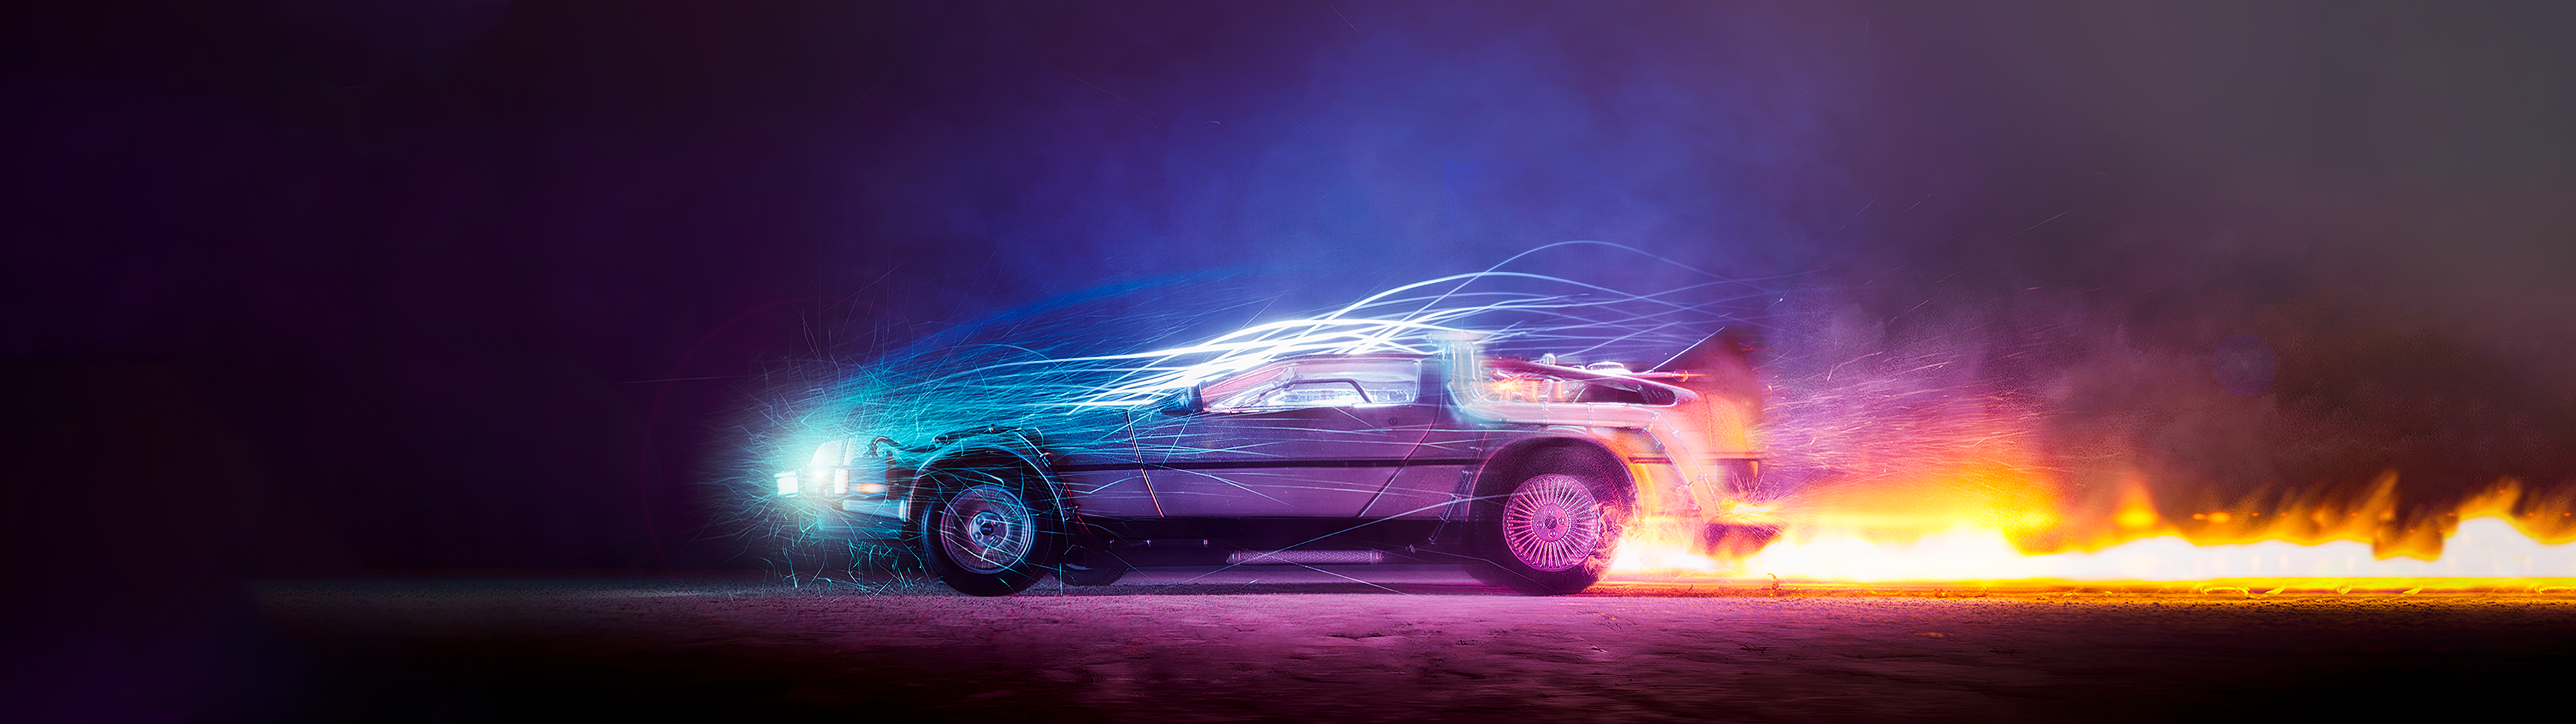 Back To The Future By Felix Hernandez R Multiwall